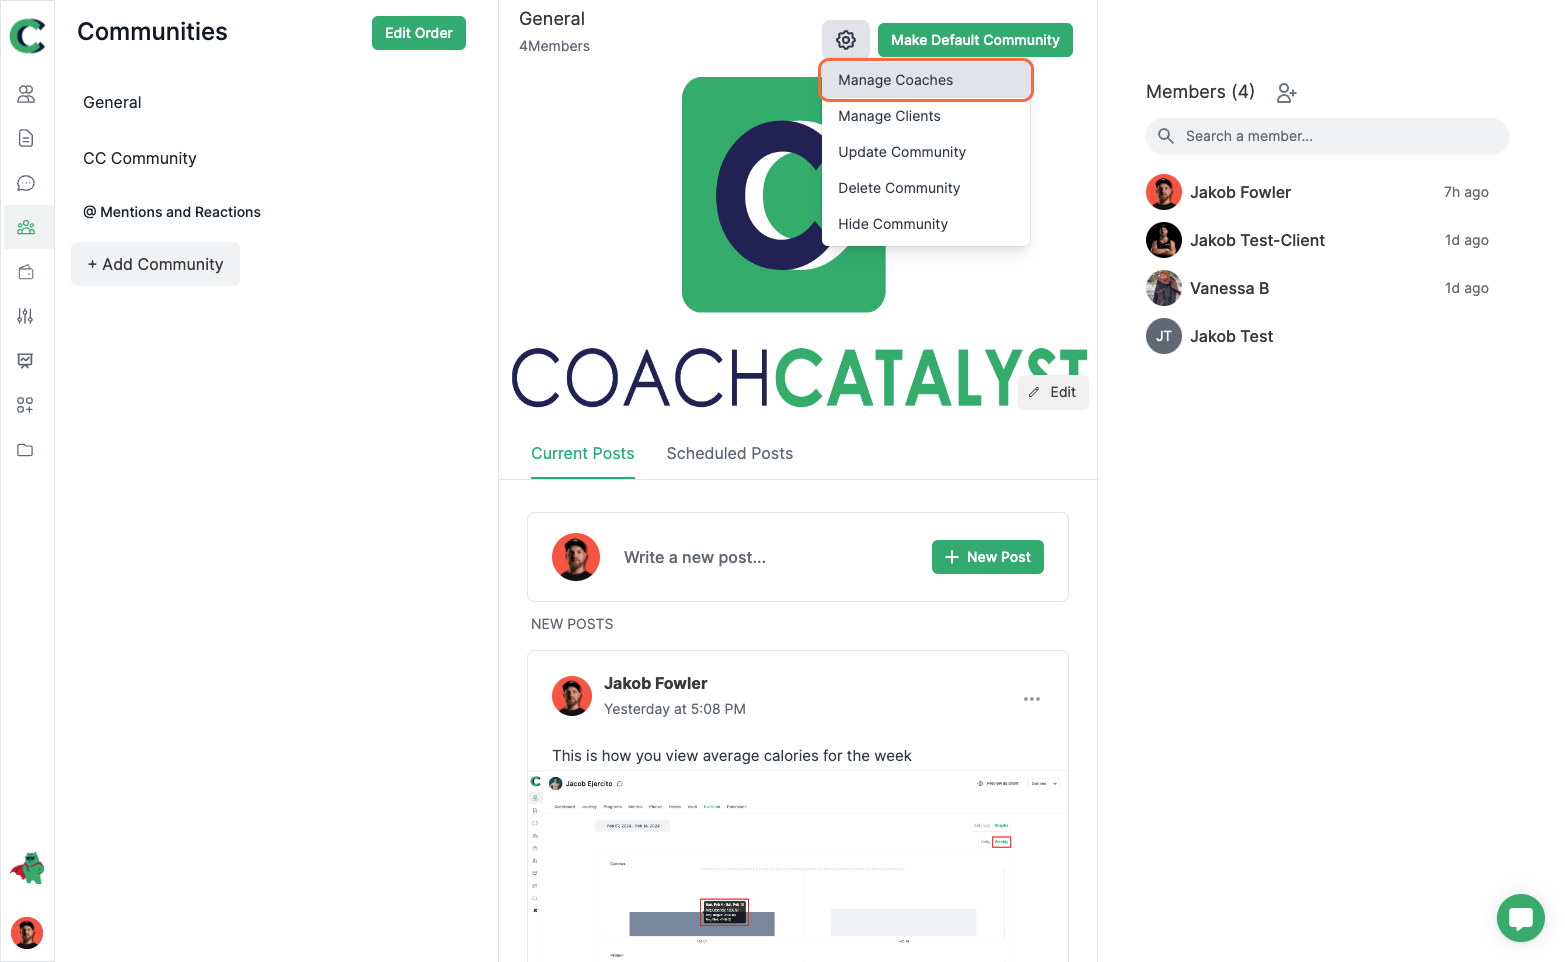 Click on Manage Coaches